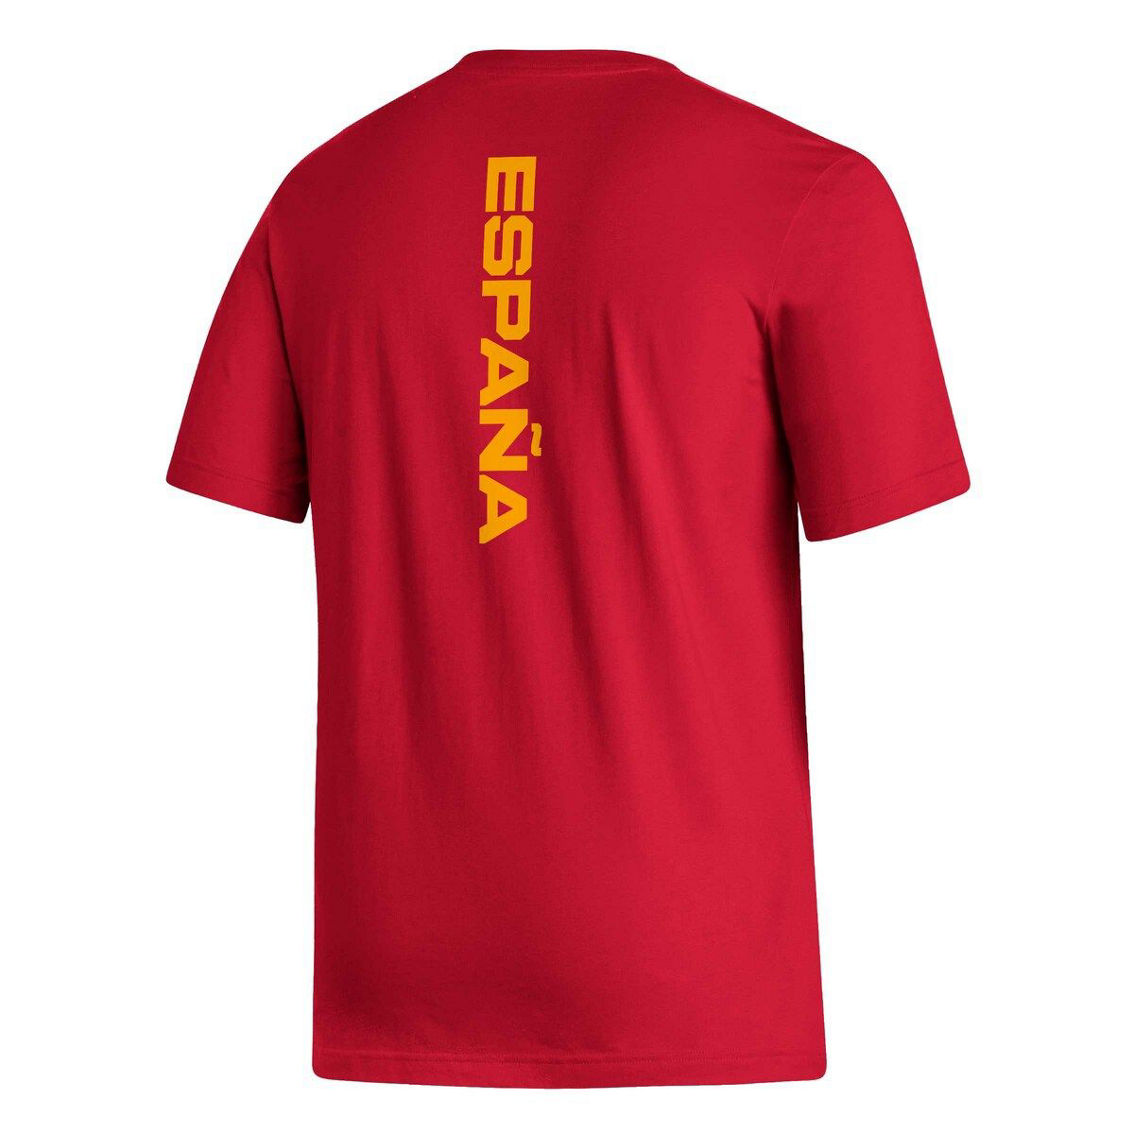 adidas Men's Red Spain National Team Vertical Back T-Shirt - Image 4 of 4